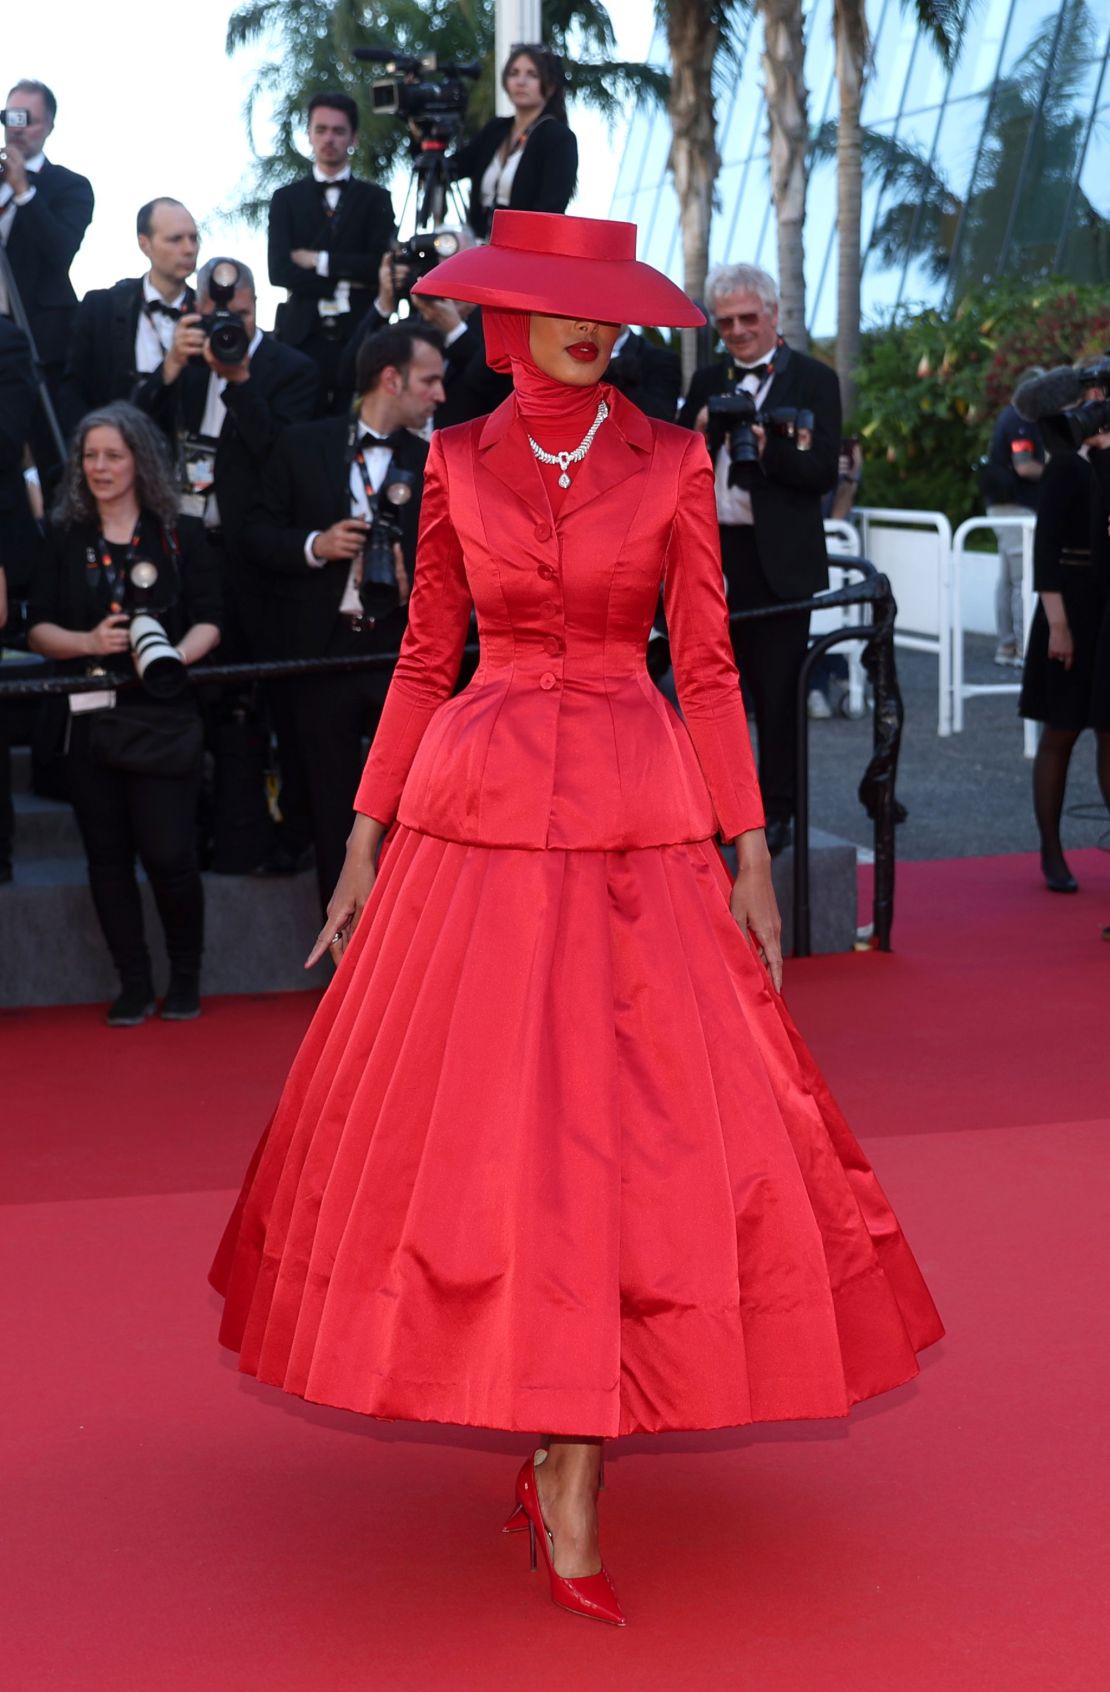 Rawdah Mohamed in Dior on May 21.